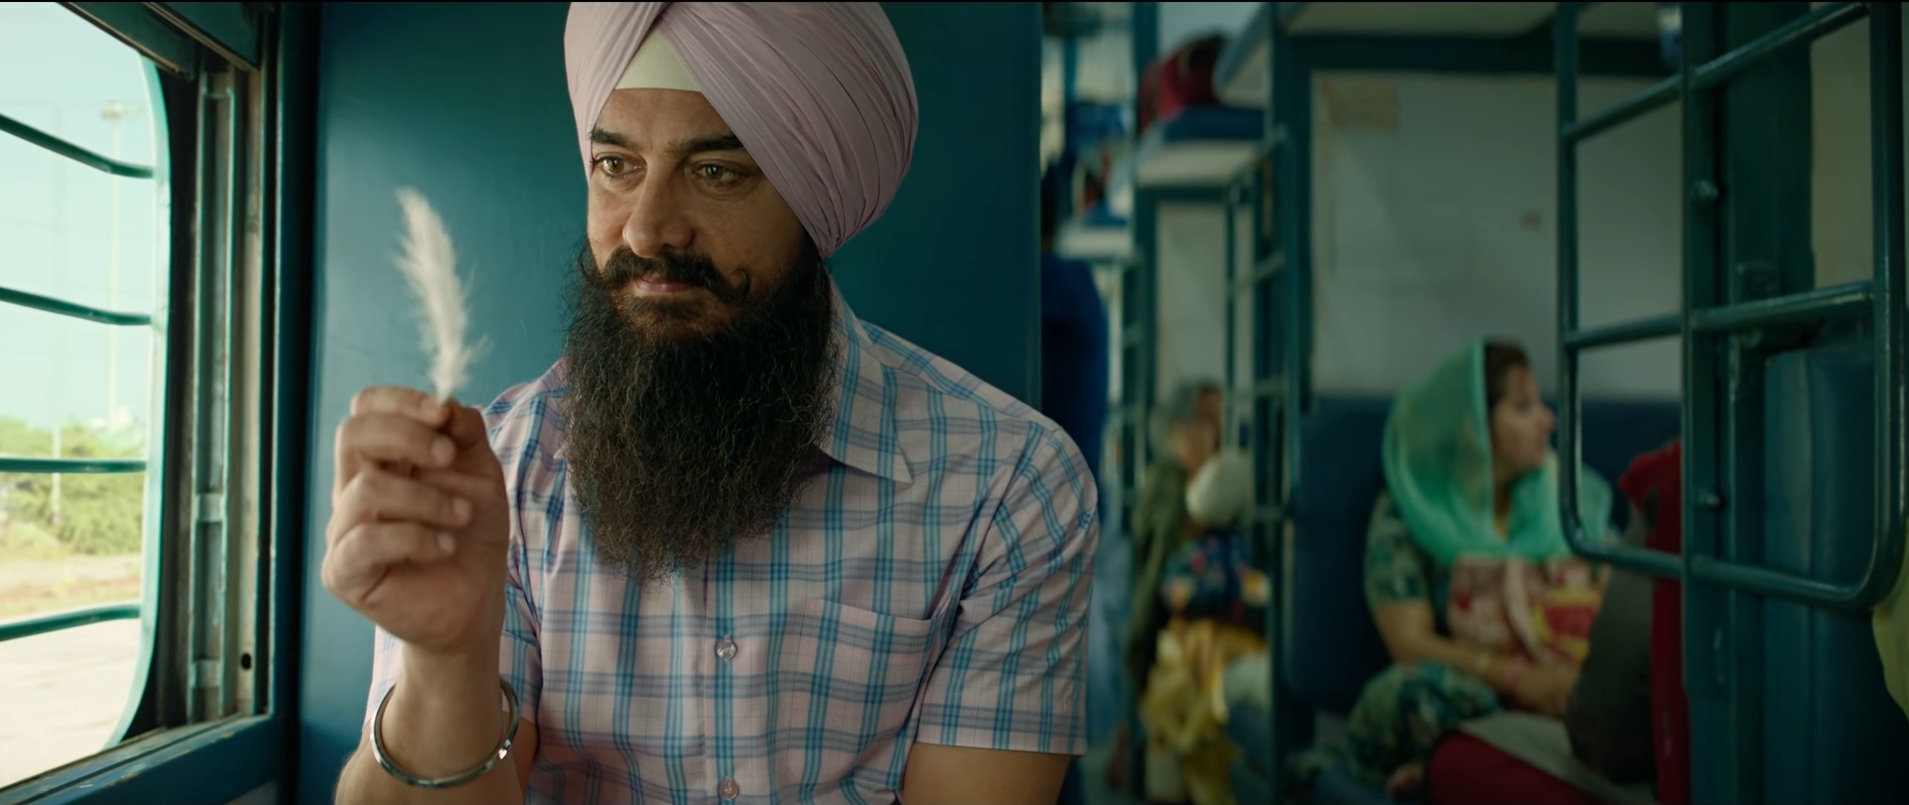 The trailer of Laal Singh Chaddha took the country by storm and netizens cannot stop gushing over it!